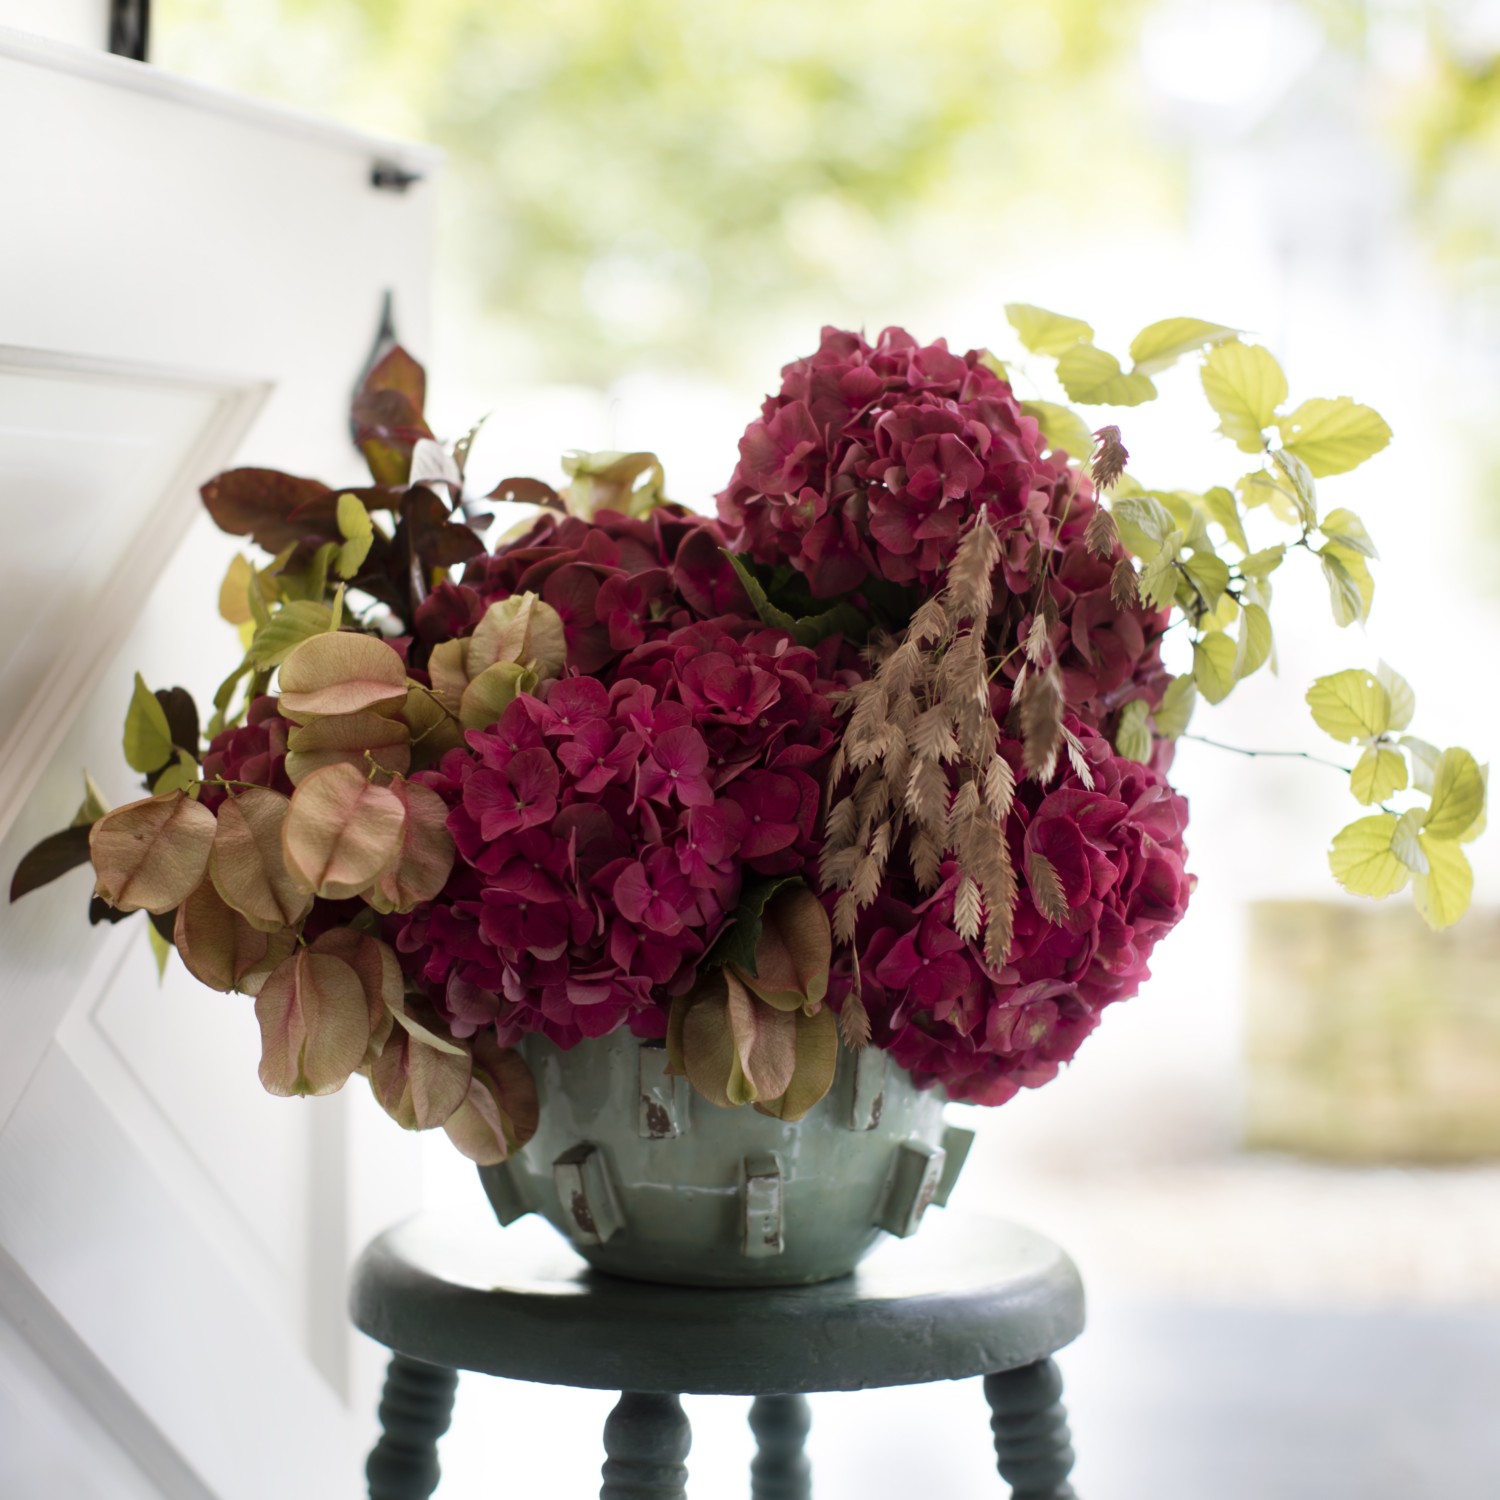 Red hydrangea blossoms blend beautifully with ruddy leaves and russet seed pods in an autumnal arrangement.